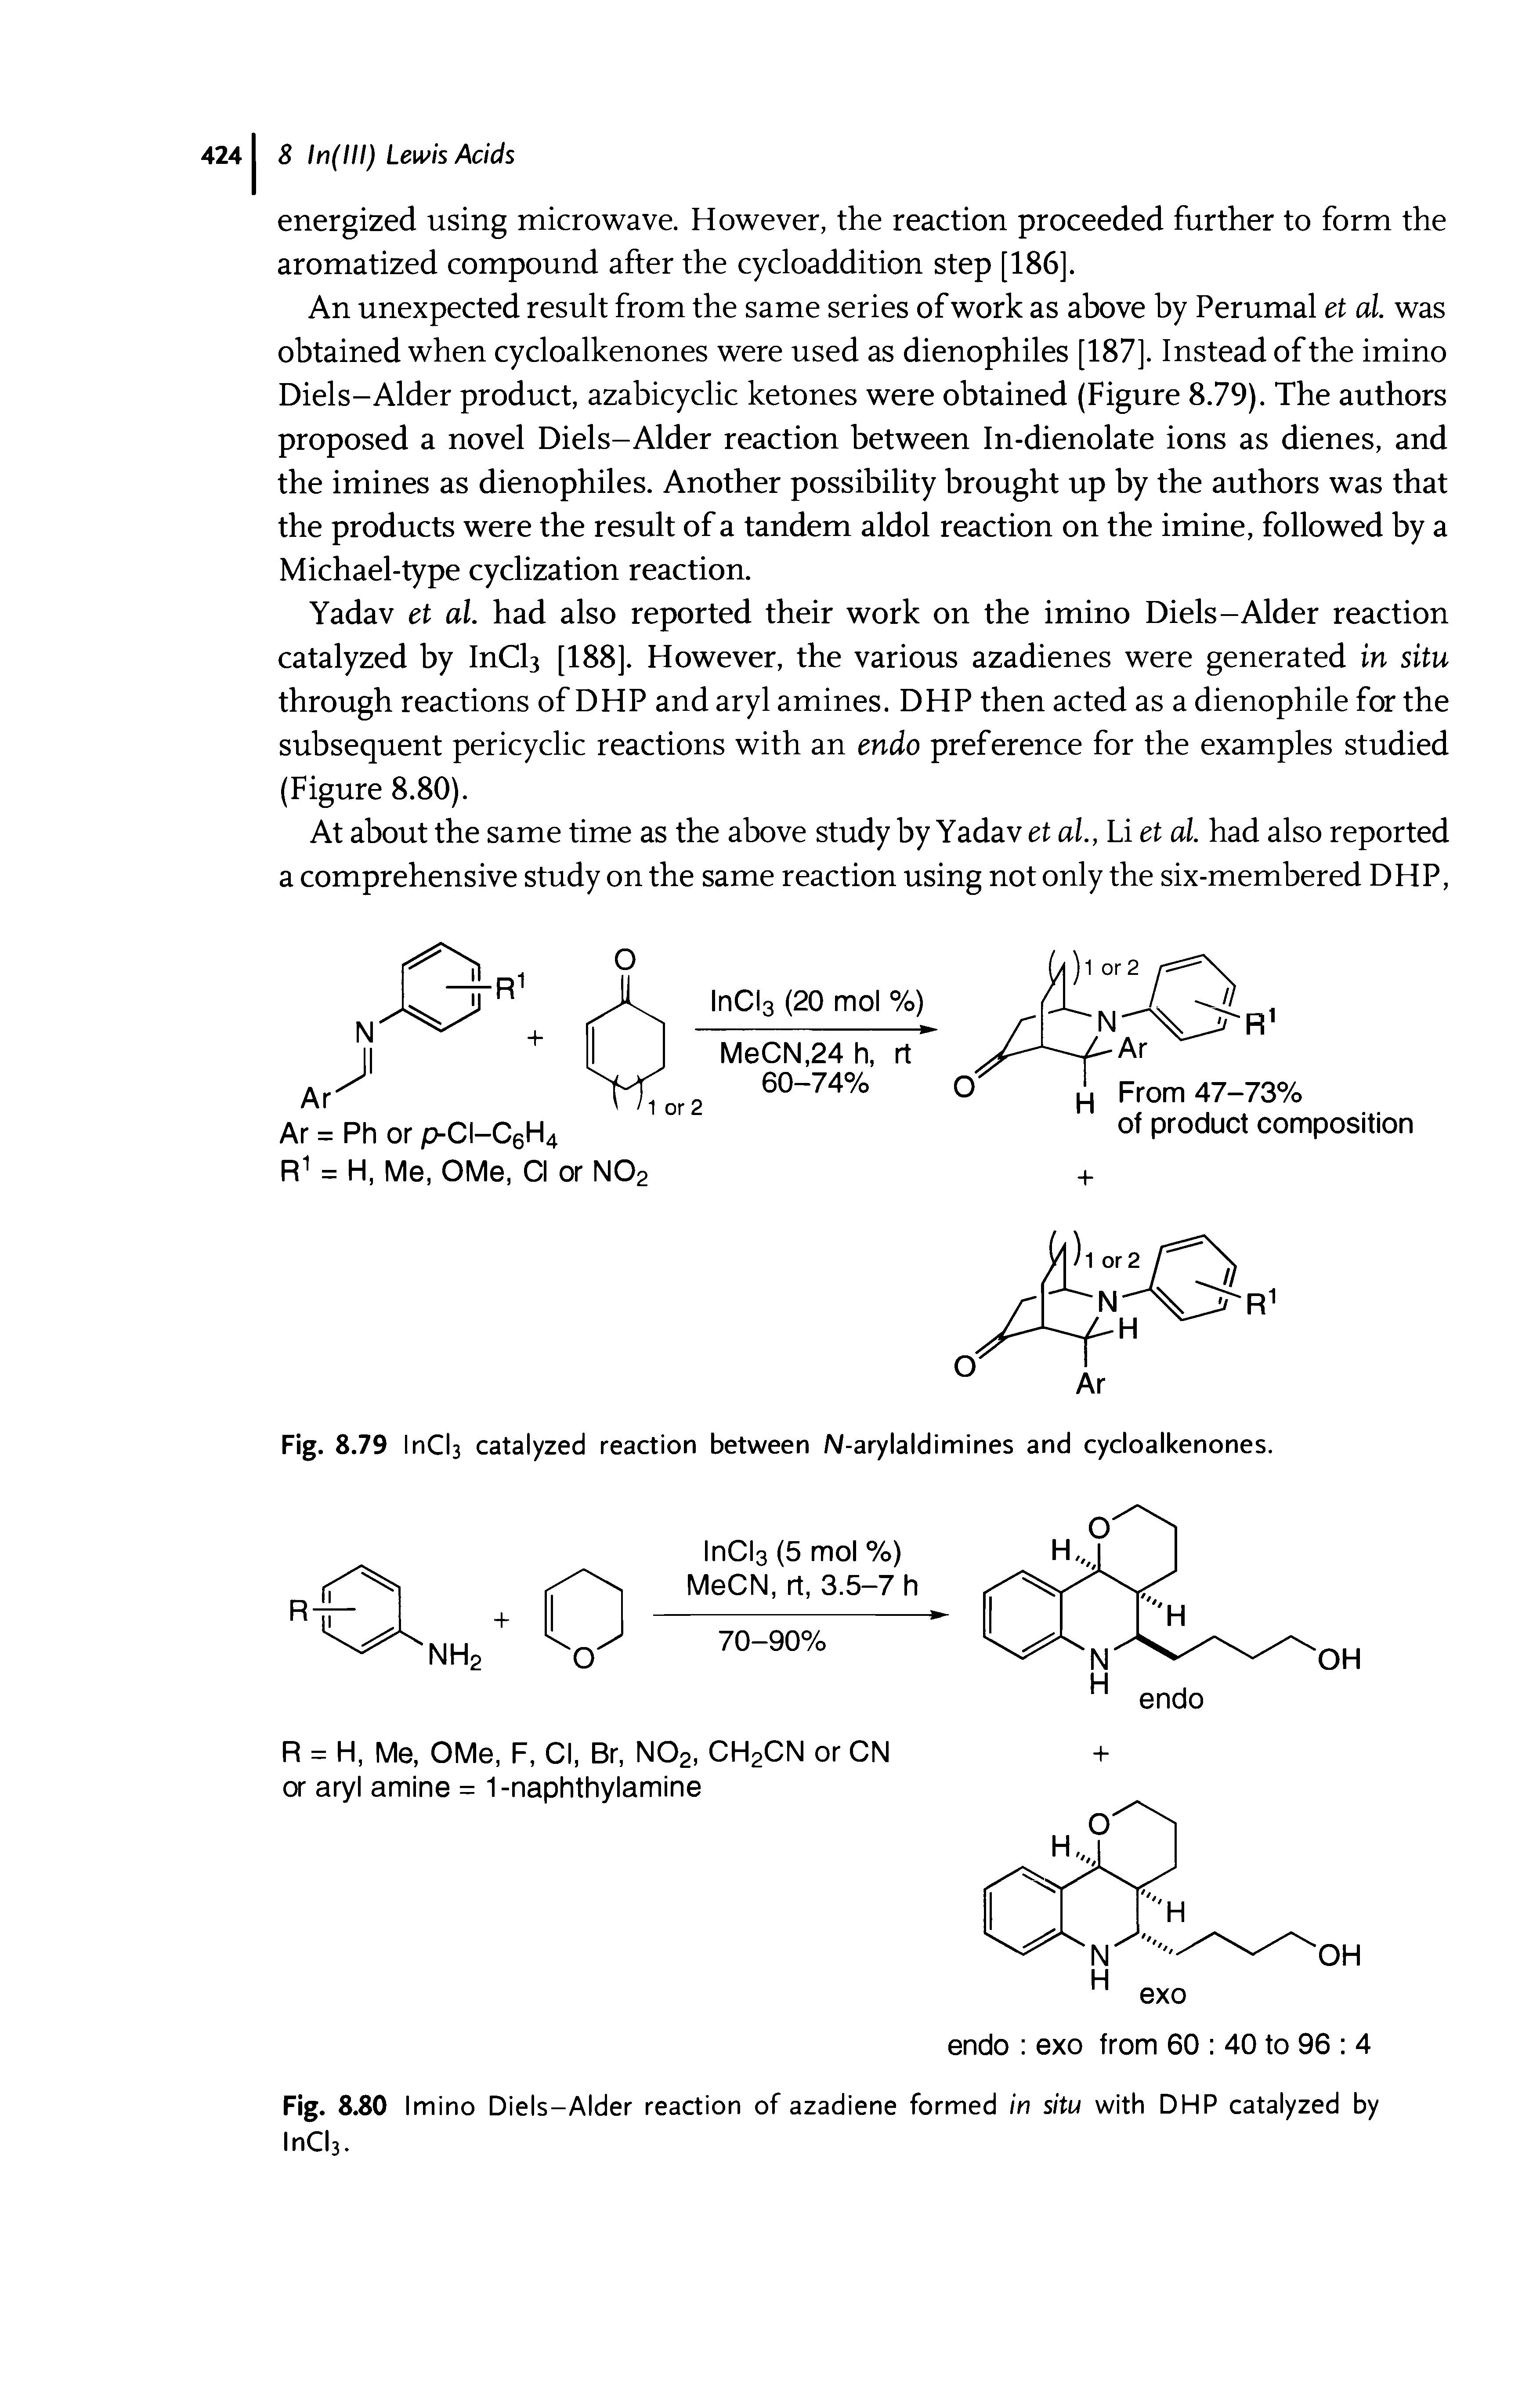 Fig. 8.80 Imino Diels-Alder reaction of azadiene formed in situ with DHP catalyzed by InCb.